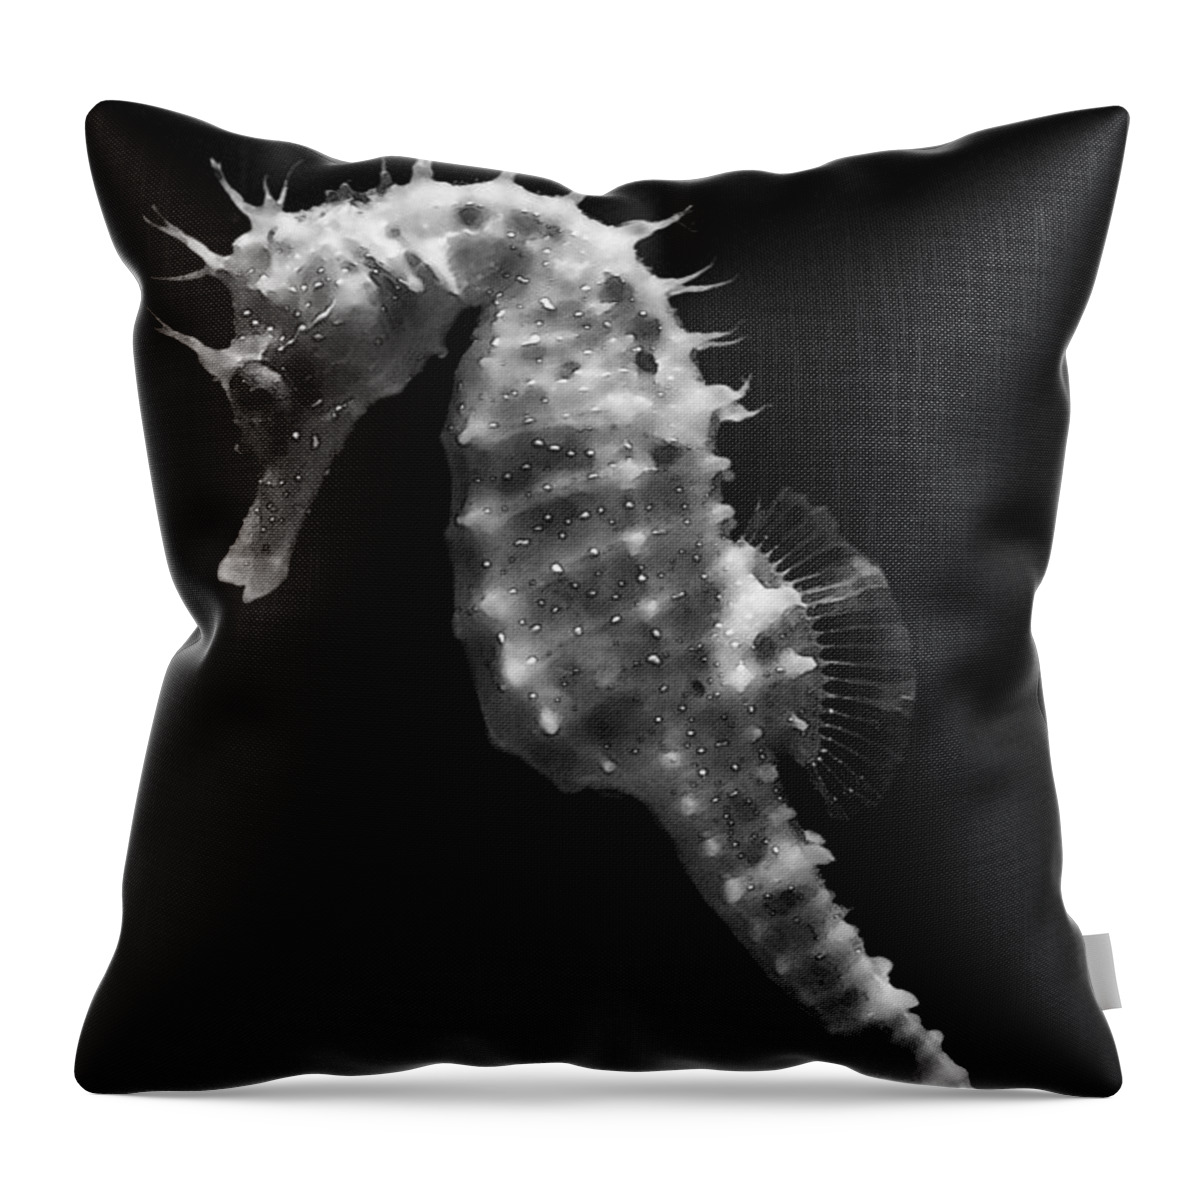 Black Throw Pillow featuring the mixed media Painterly Seahorse by Pati Photography